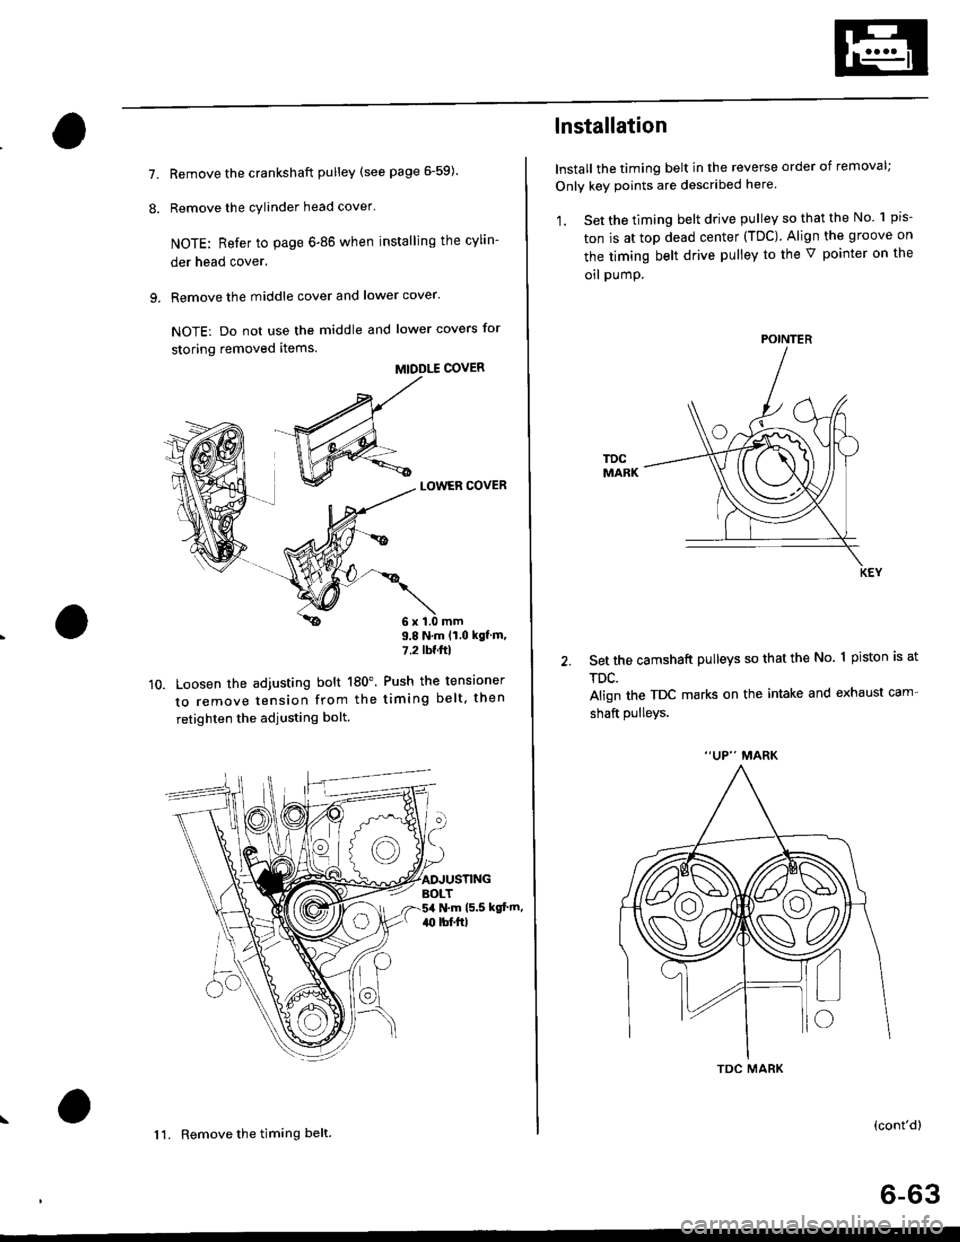 HONDA CIVIC 1997 6.G Workshop Manual 7.
8.
Remove the crankshaft pulley (see page 6-59).
Remove the cylinder head cover
NOTE: Refer to page 6-86 when installing the cylin-
der head cover.
Remove the middle cover and lower cover.
NOTE: D